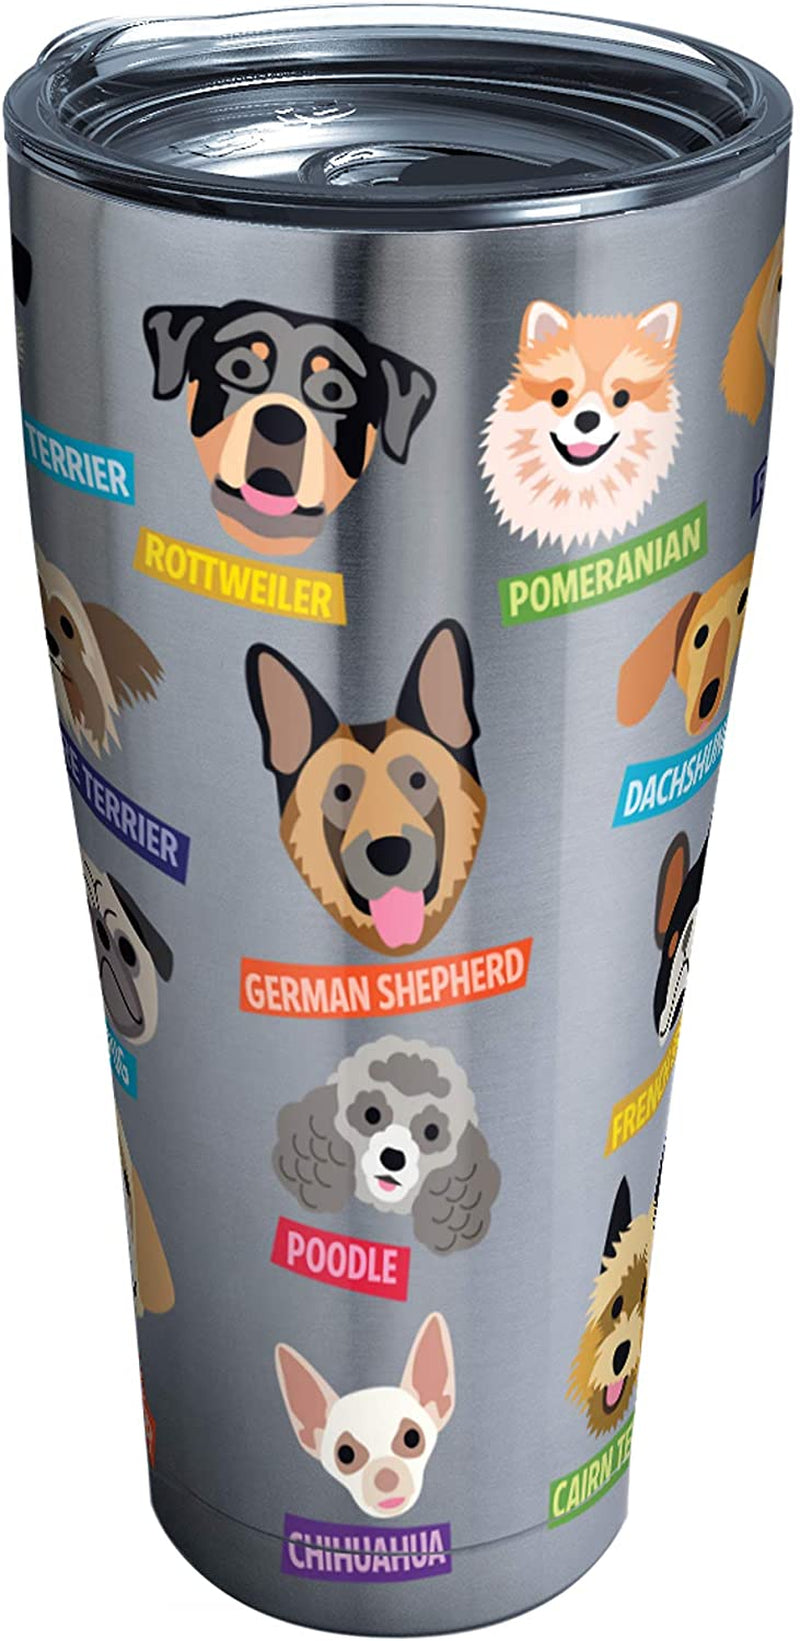 Tervis Flat Art - Dogs Made in USA Double Walled Insulated Tumbler Cup Keeps Drinks Cold & Hot, 16Oz, Classic